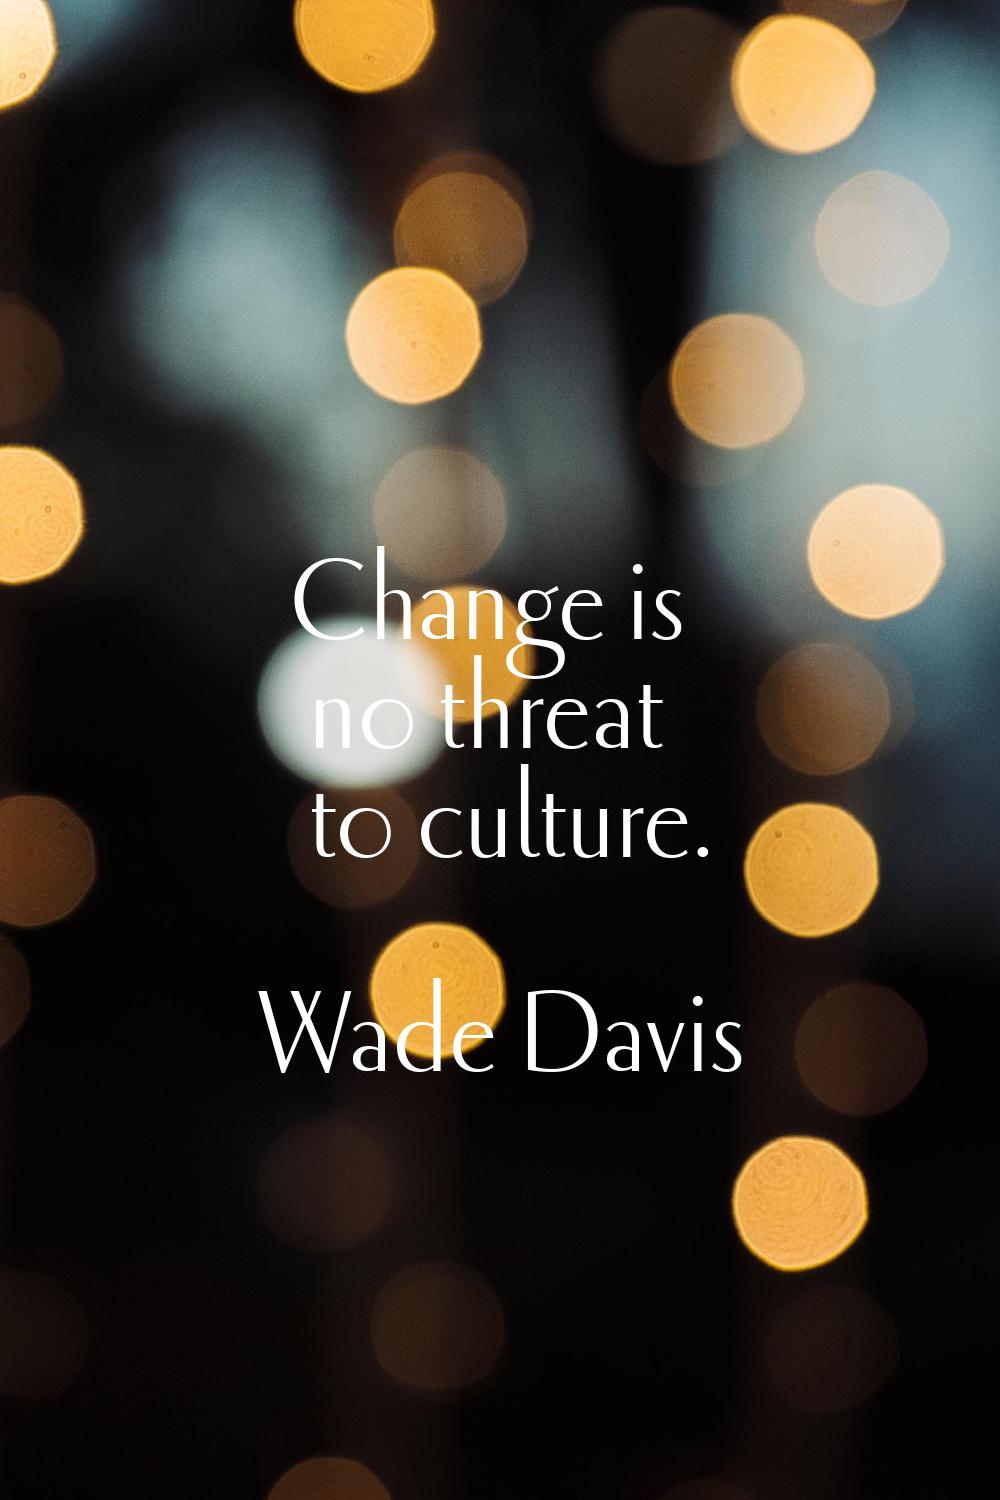 Change is no threat to culture.